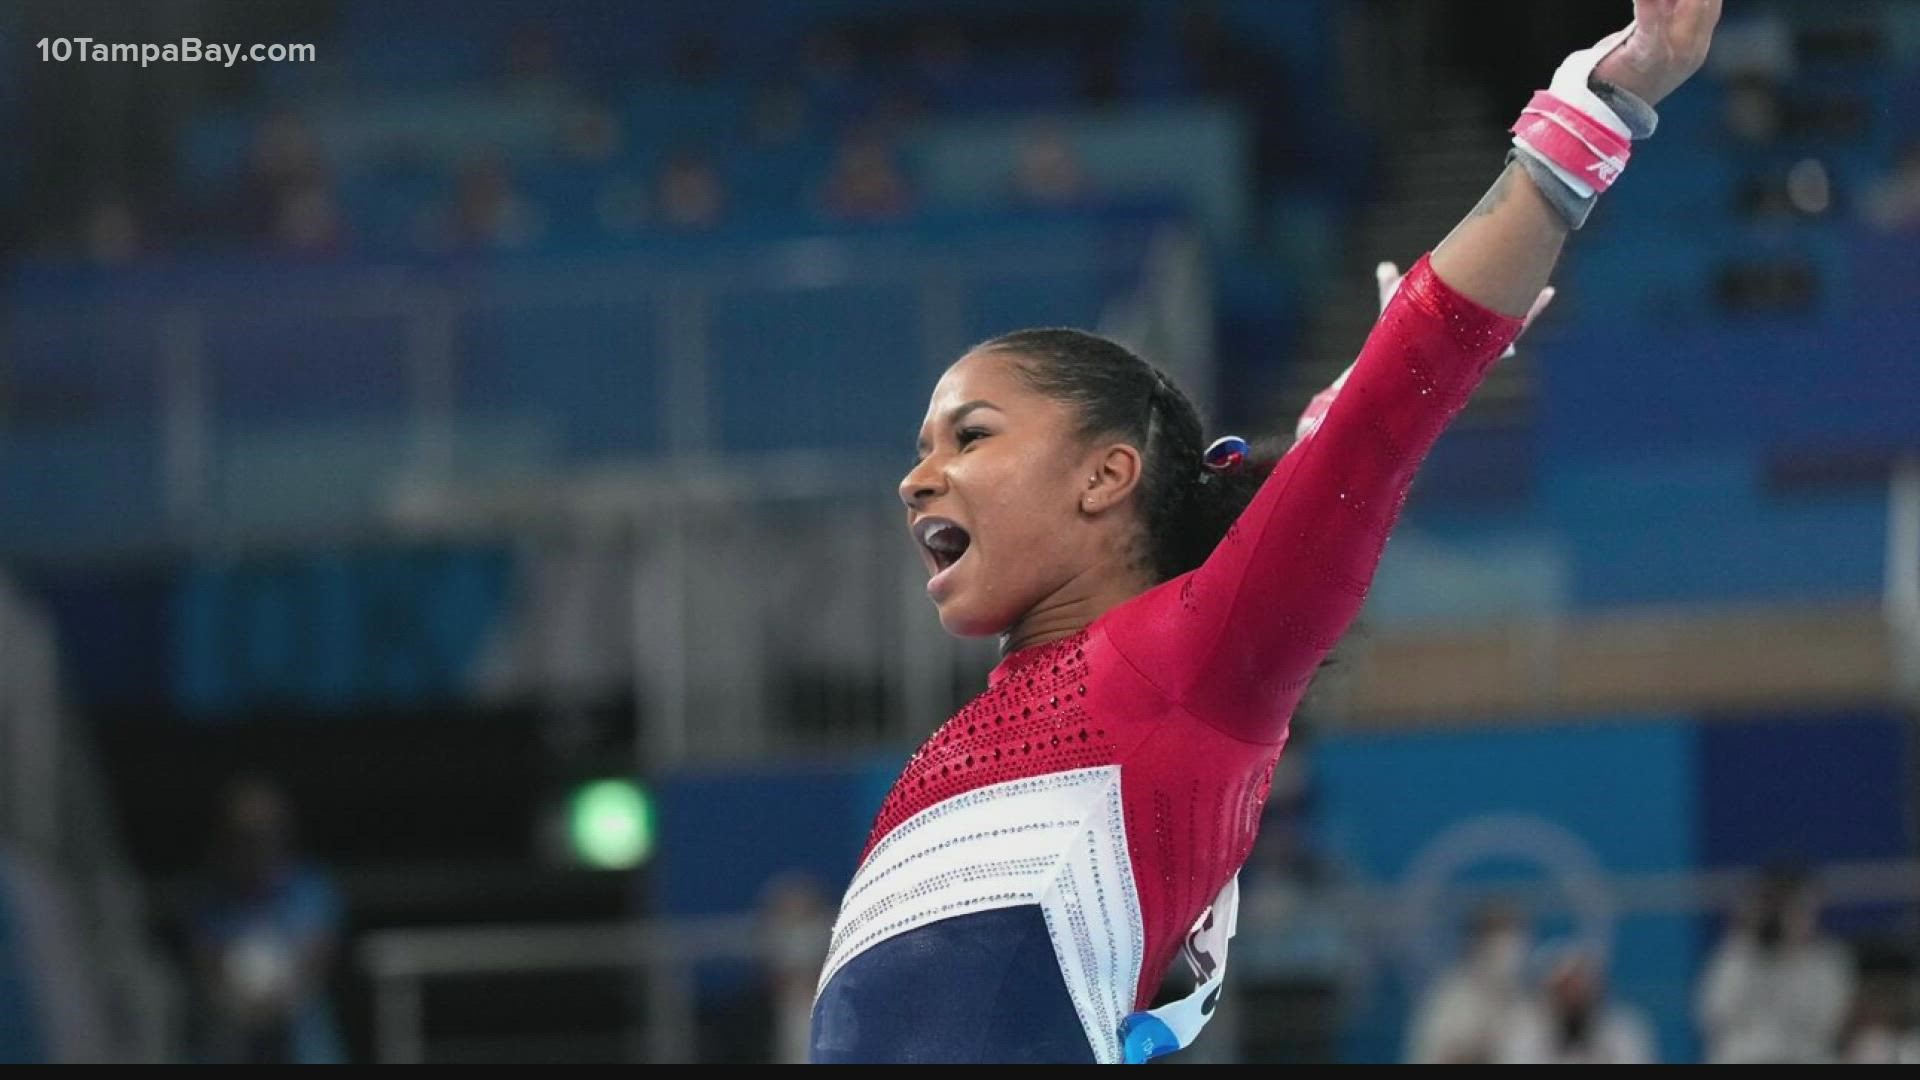 Jordan Chiles helped Team USA win silver in gymnastics at the Tokyo Games. Back in Florida, 7,200 miles away, her grandmother beamed with pride.